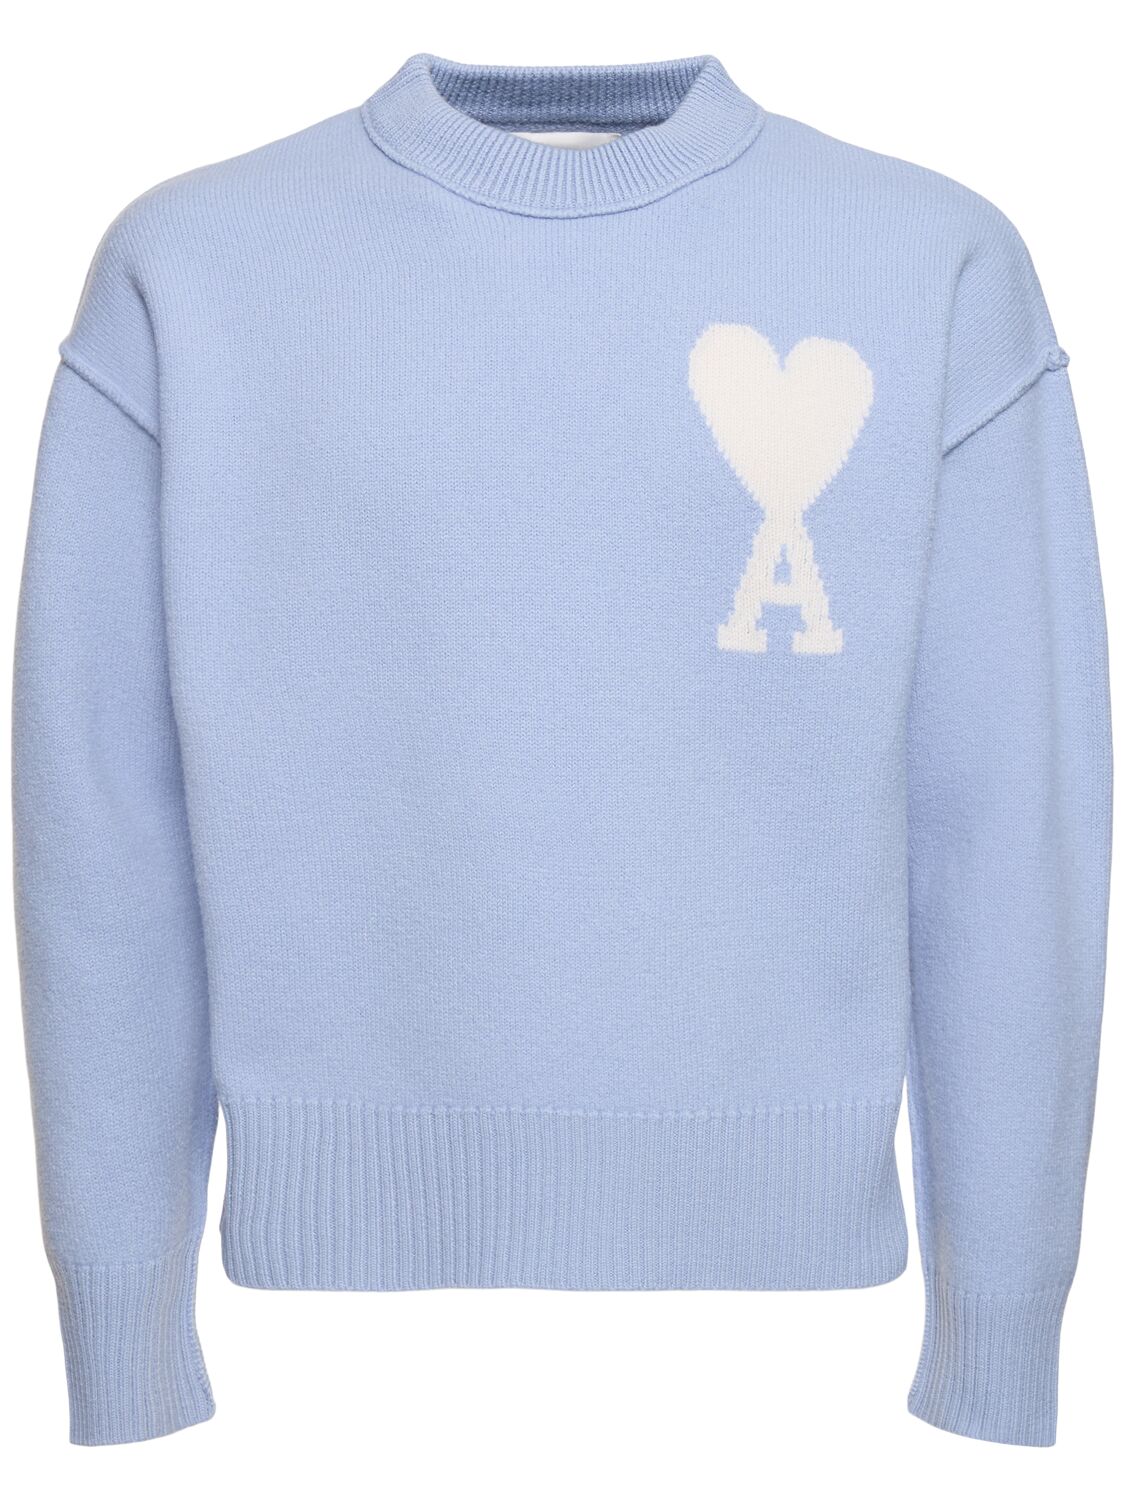 Ami Alexandre Mattiussi Adc Felted Wool Knit Sweater In Cashmere Blue